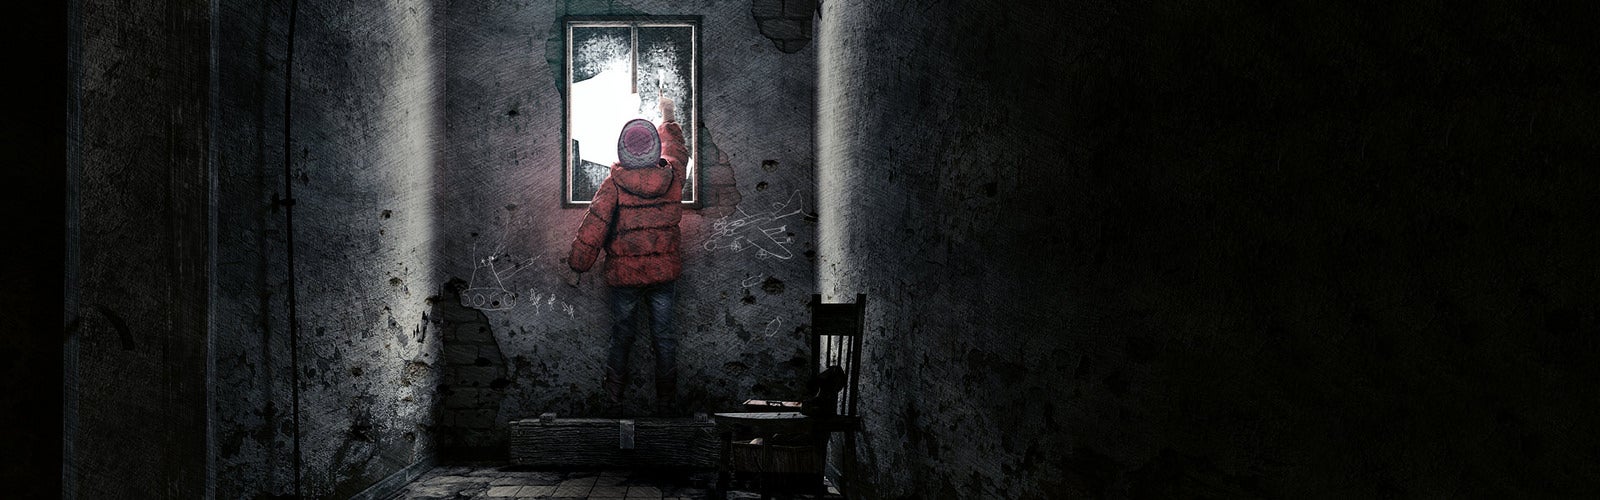 Image for Survival sim This War of Mine: The Little Ones is coming to PS4 and Xbox One